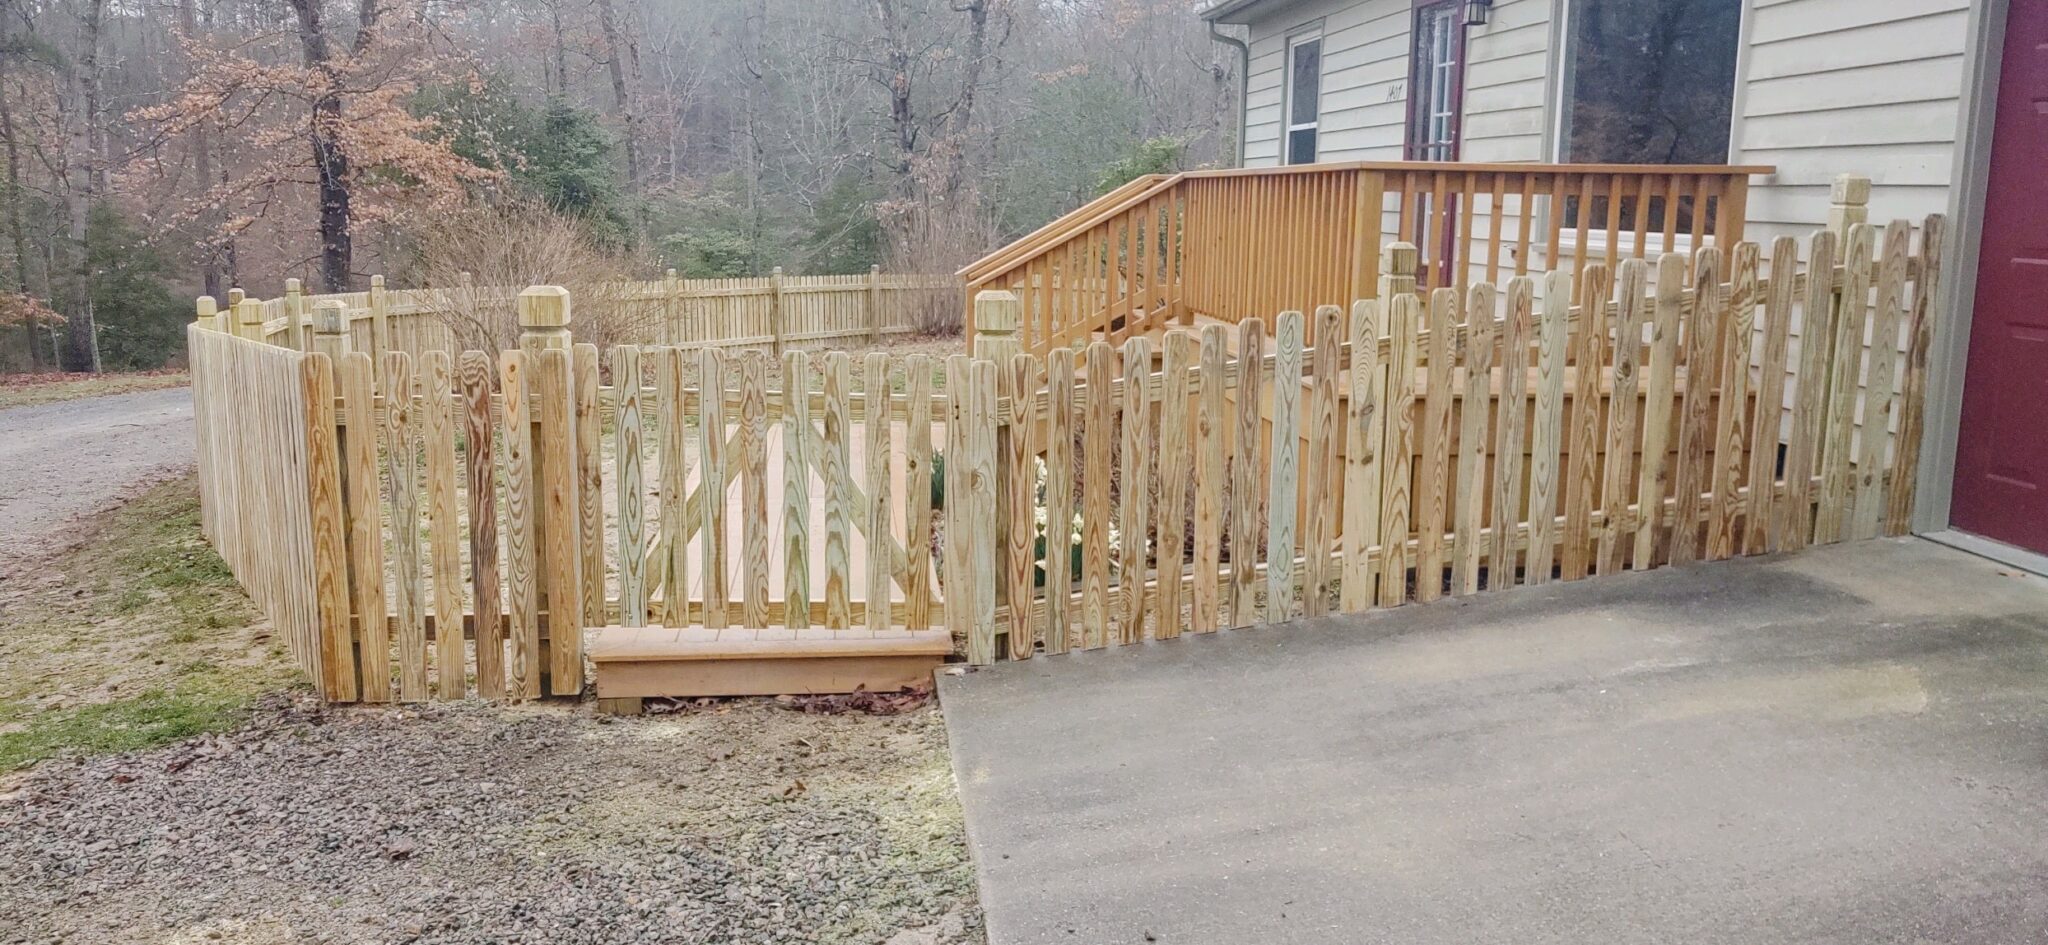 Dog ear picket fence with gate